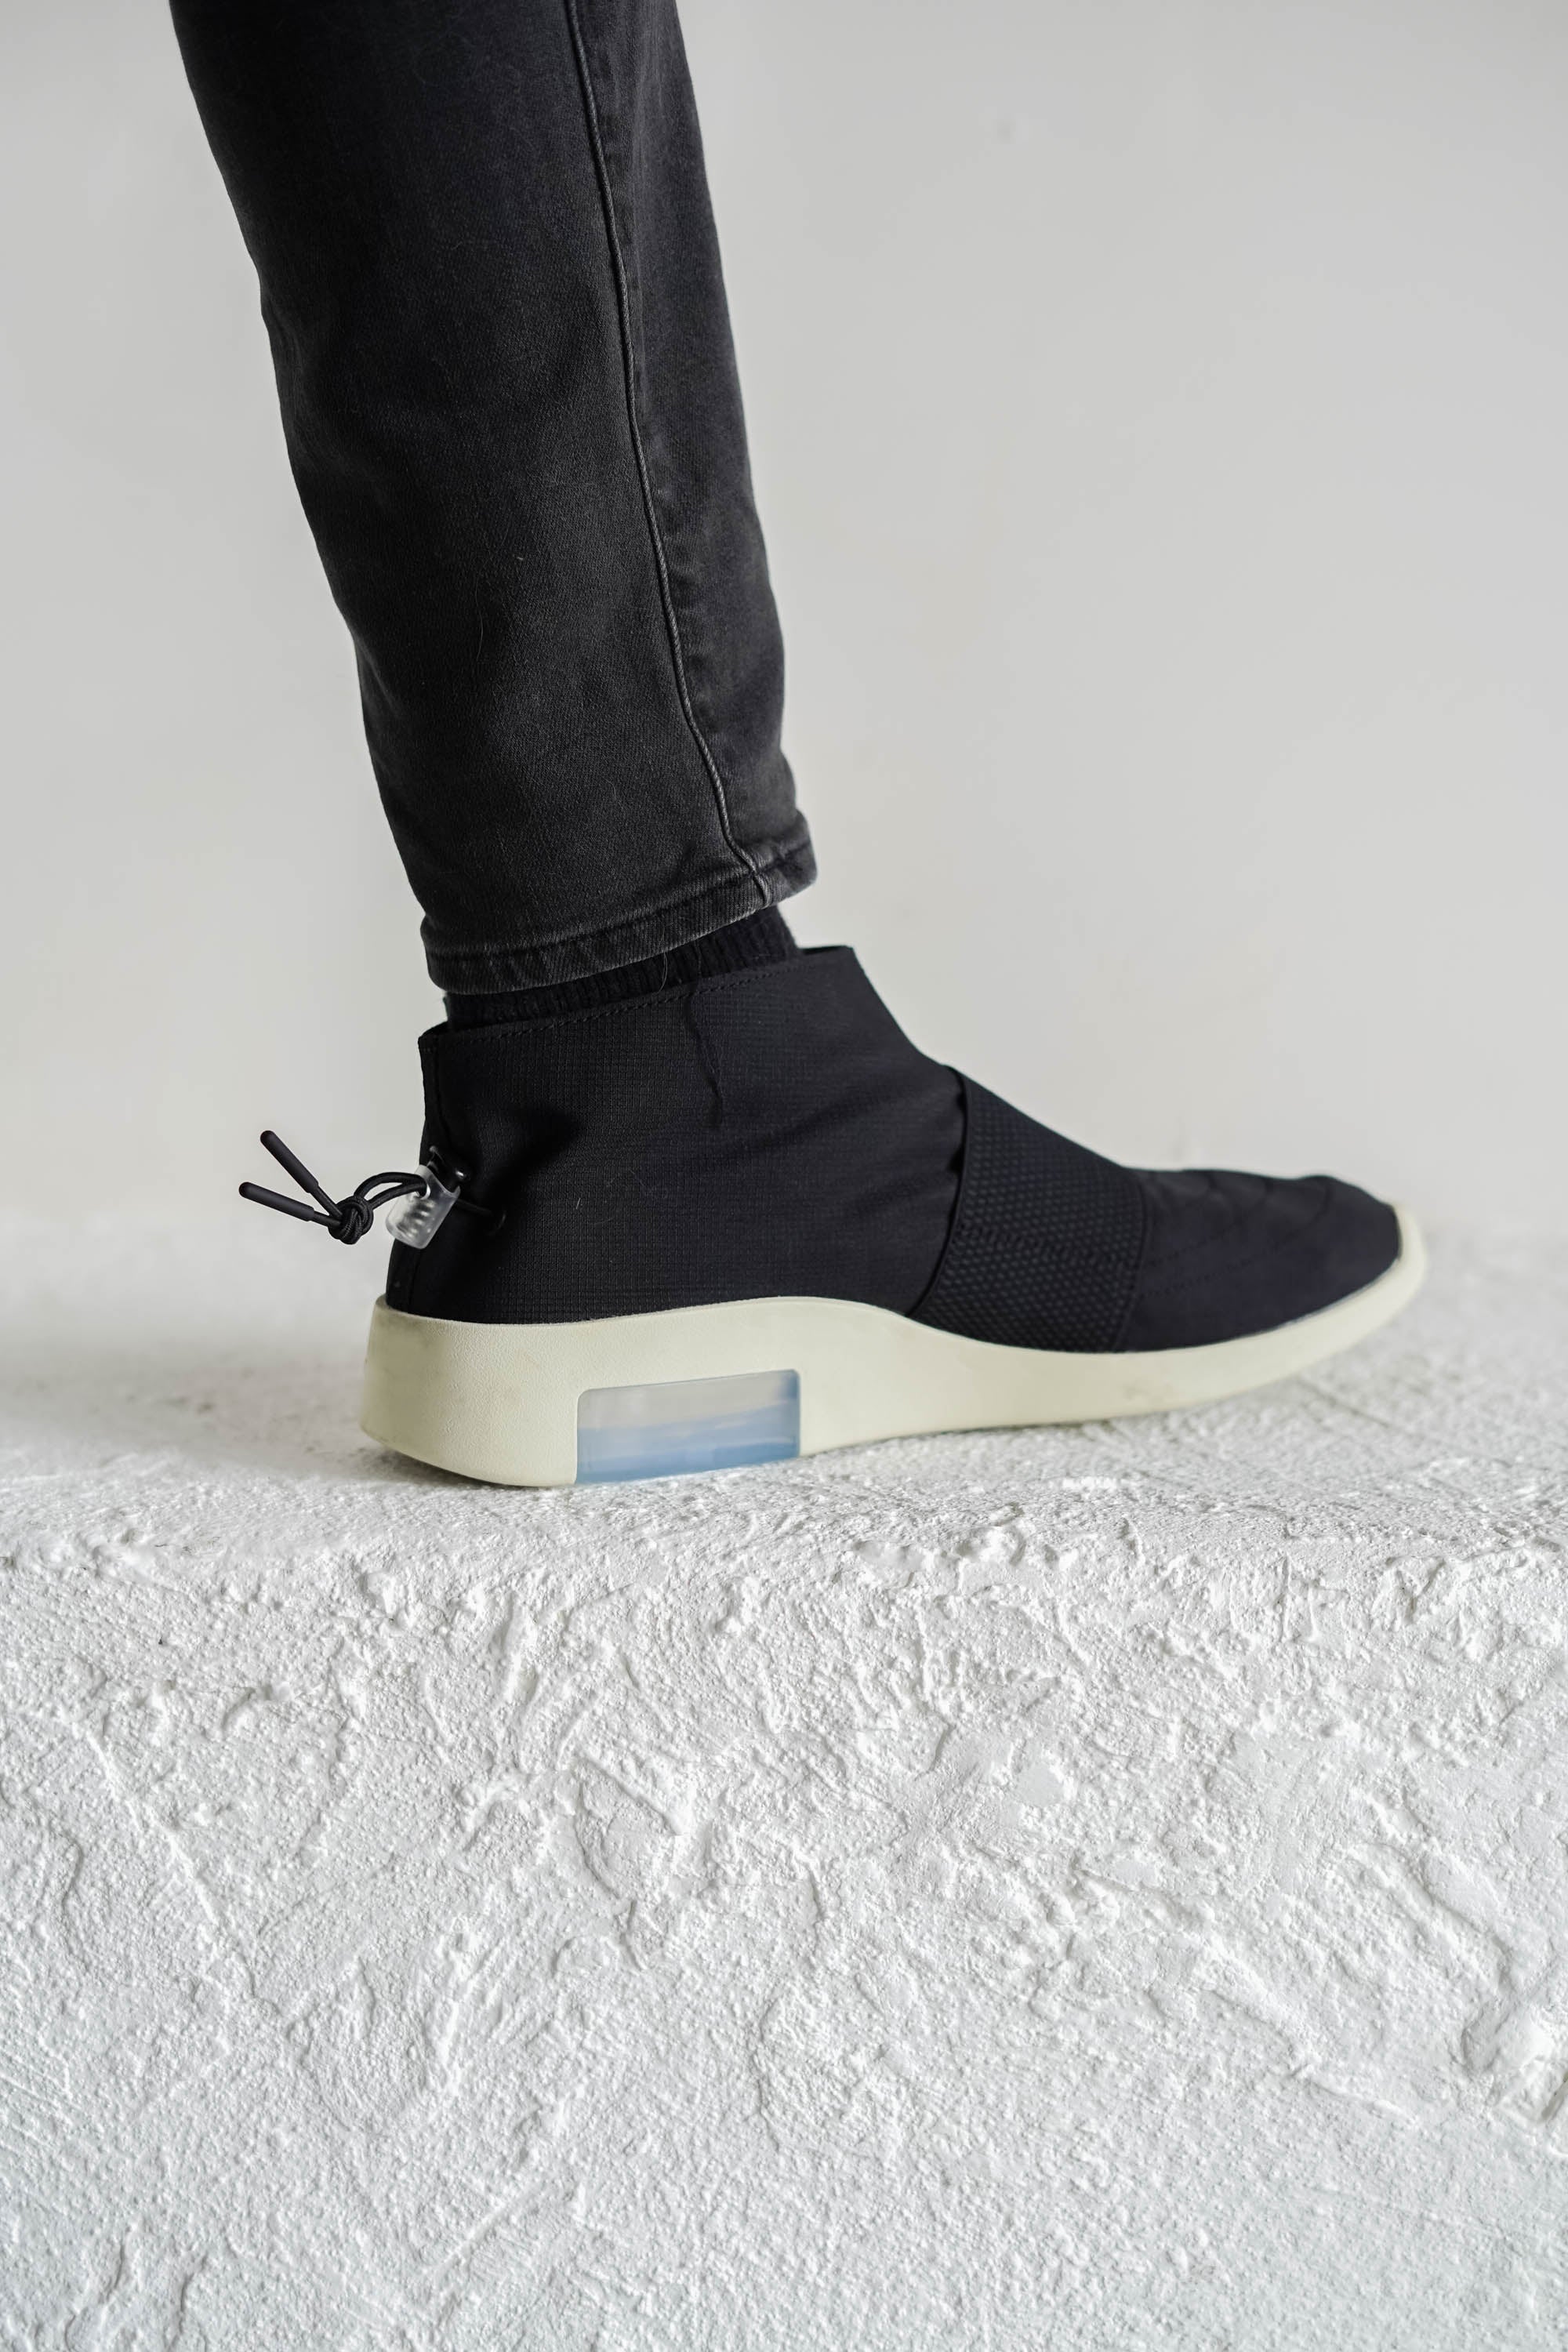 NIKE Fear of God Moccasin Black 12 — Collective Will